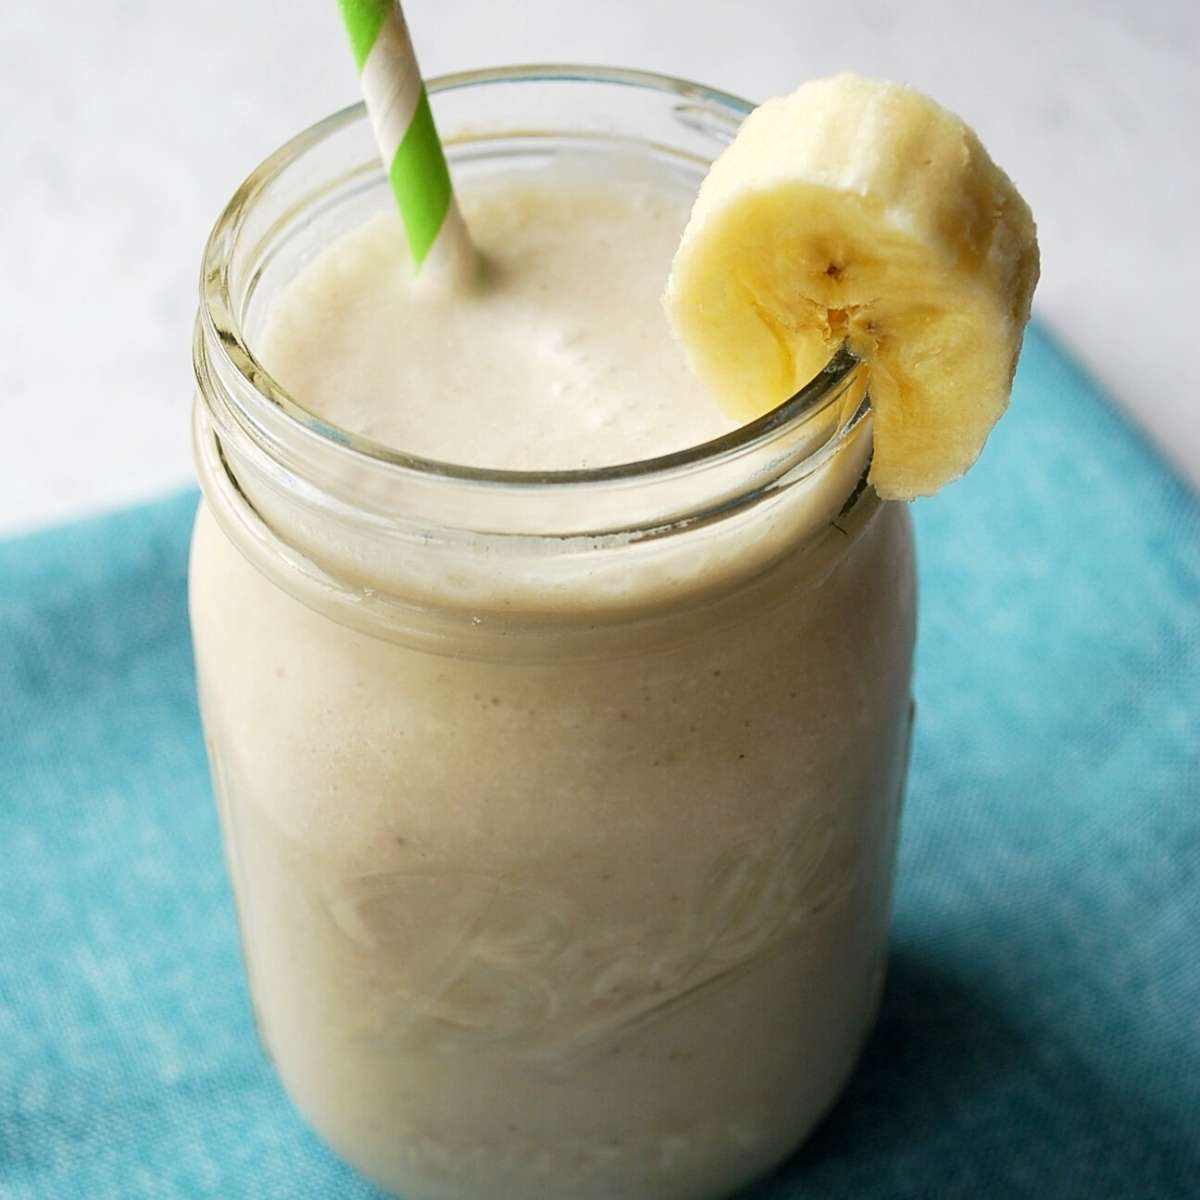 Coconut Banana Smoothie {Whole30 Approved} - Amee's Savory Dish